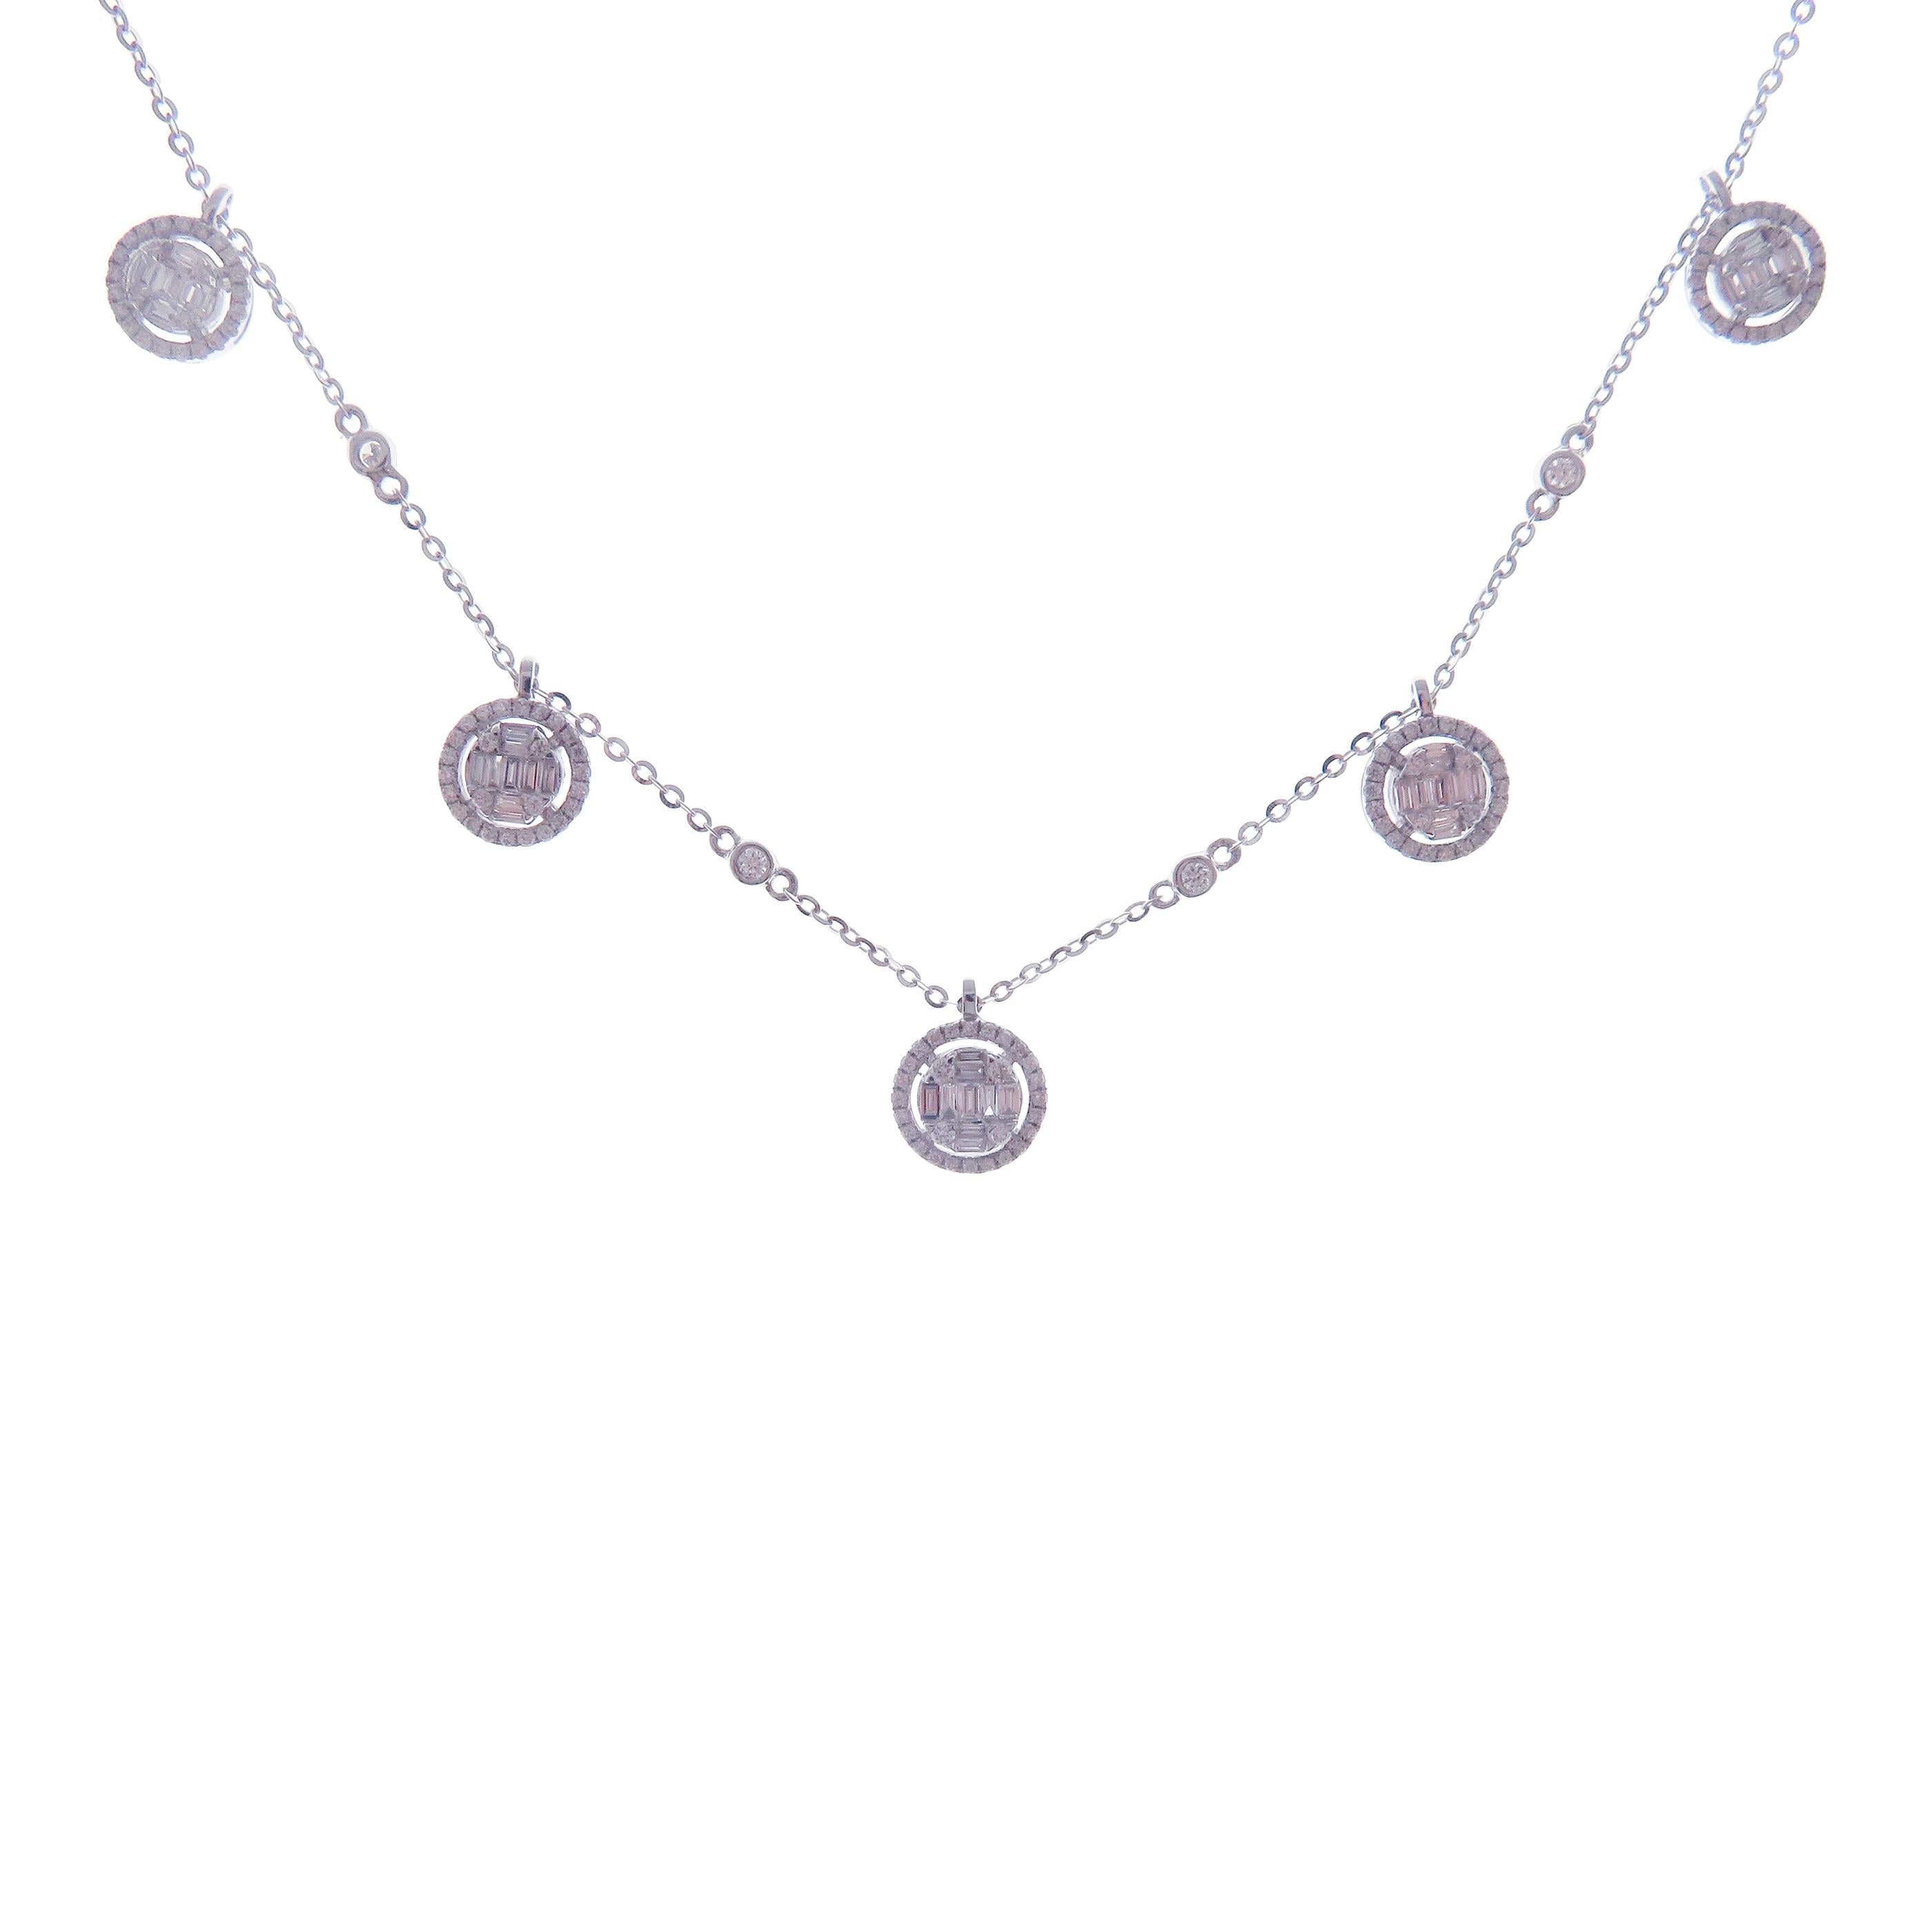 This delicate necklace is crafted in 18-karat white gold, weighing approximately 1.00 total carats of SI-H Quality white diamonds. 
18-karat yellow gold and rose gold are also available upon request 

Necklace is 16